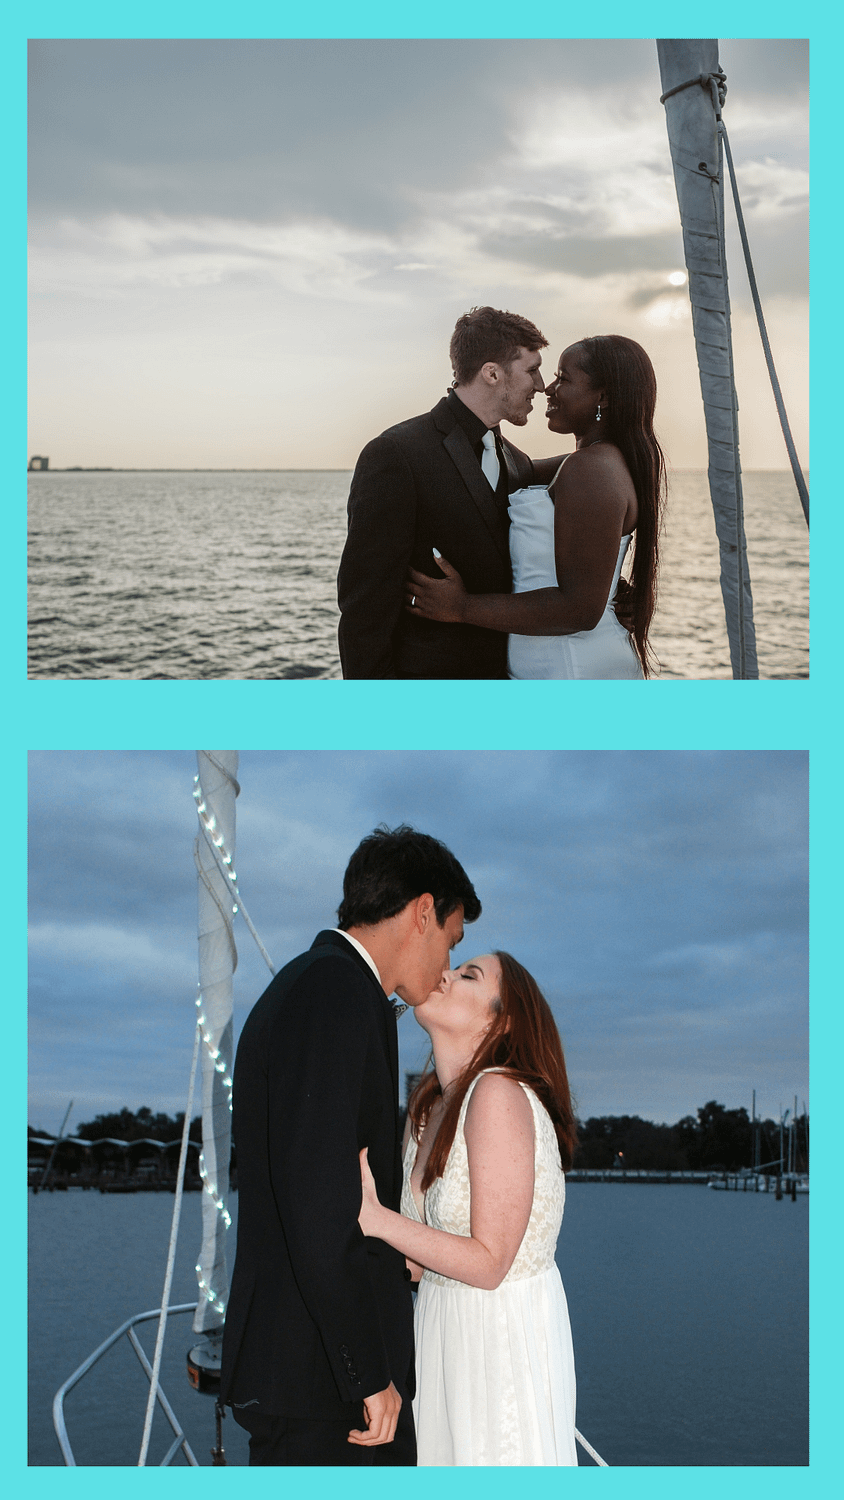 Boat Wedding Package - All inclusive boat wedding